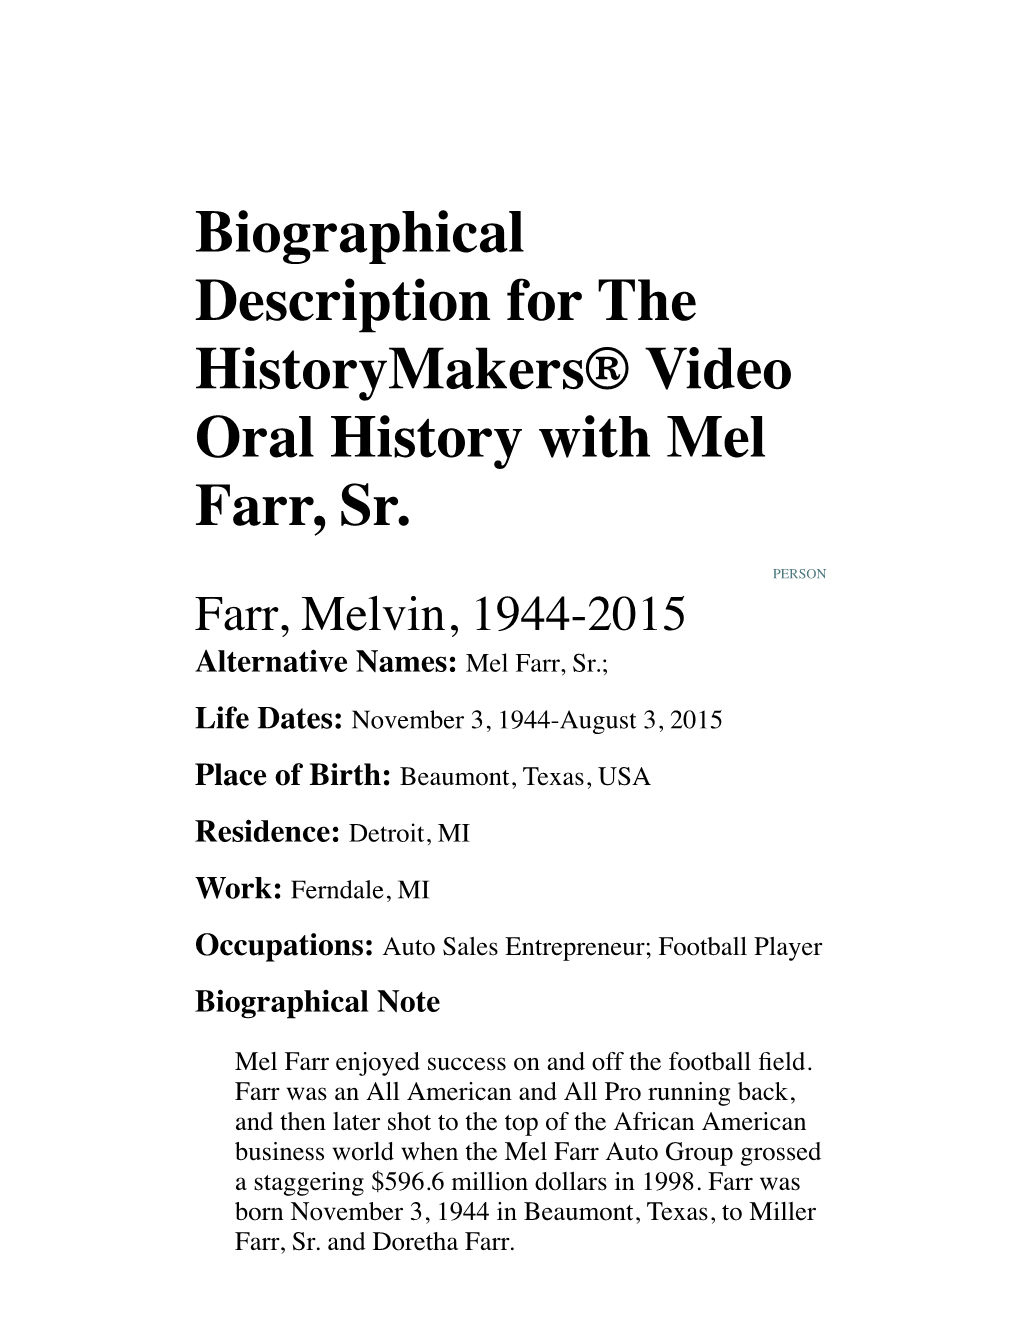 Biographical Description for the Historymakers® Video Oral History with Mel Farr, Sr